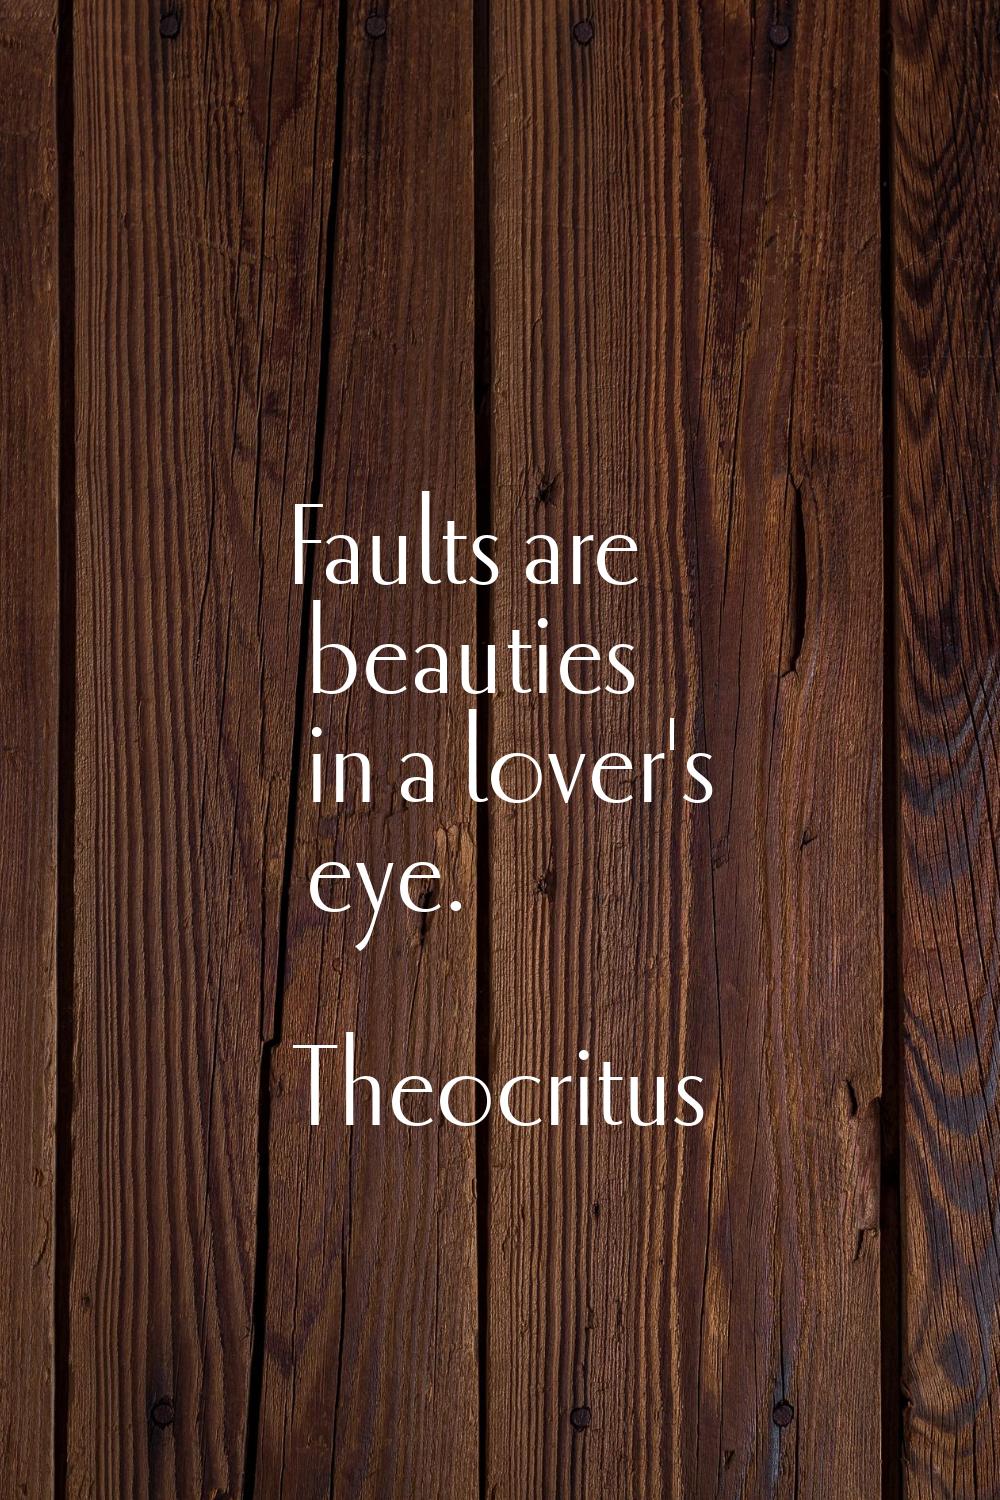 Faults are beauties in a lover's eye.